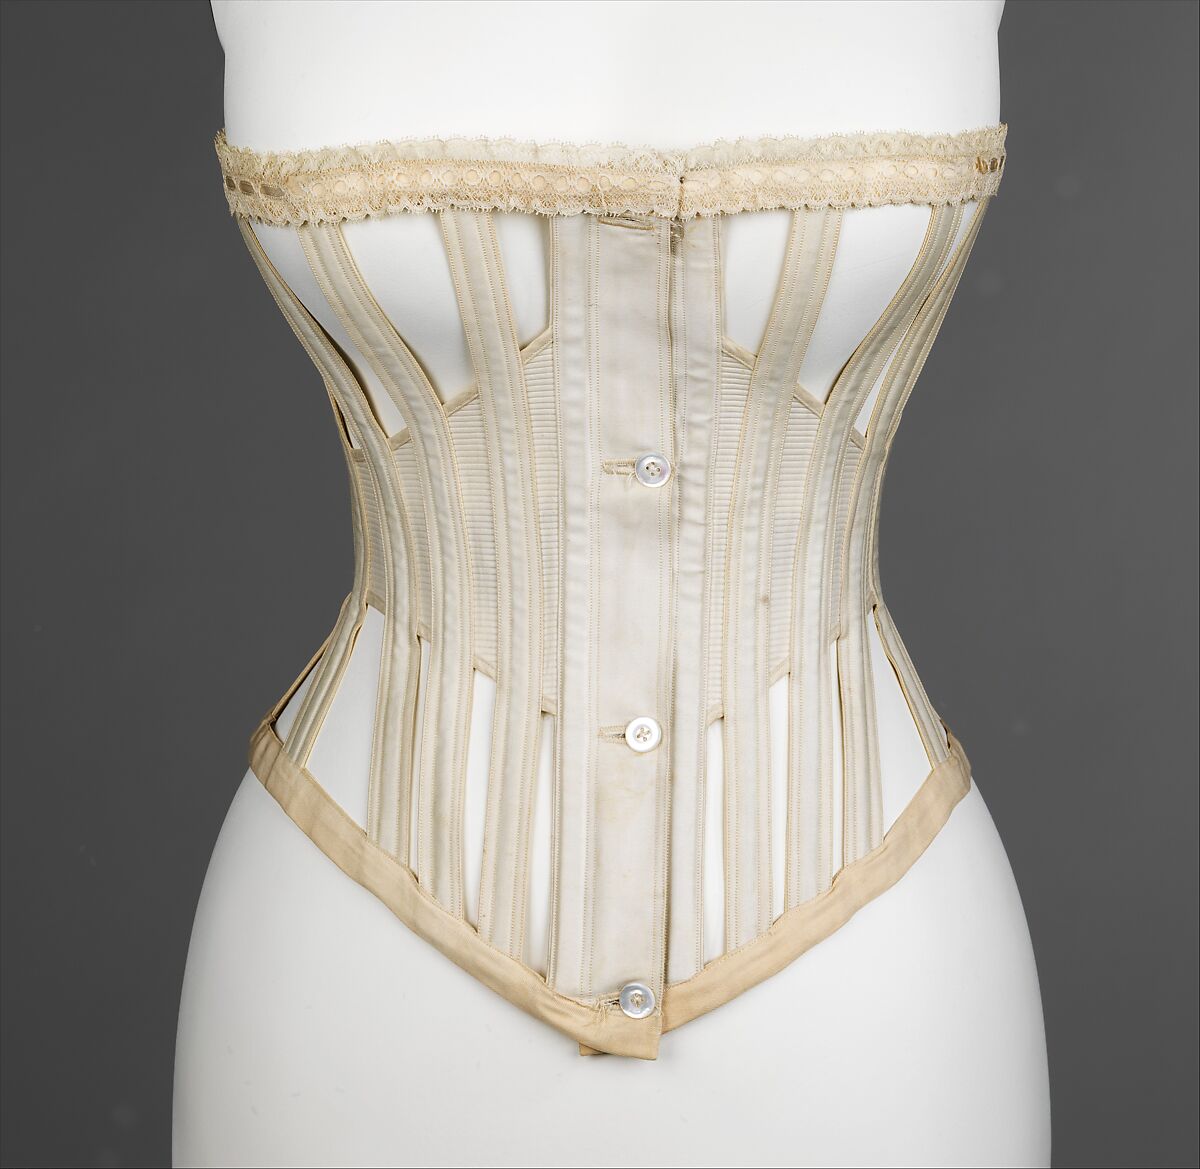 Corset, Attributed to Royal Worcester Corset Company (American, 1861–1950), cotton, metal, bone, probably American 